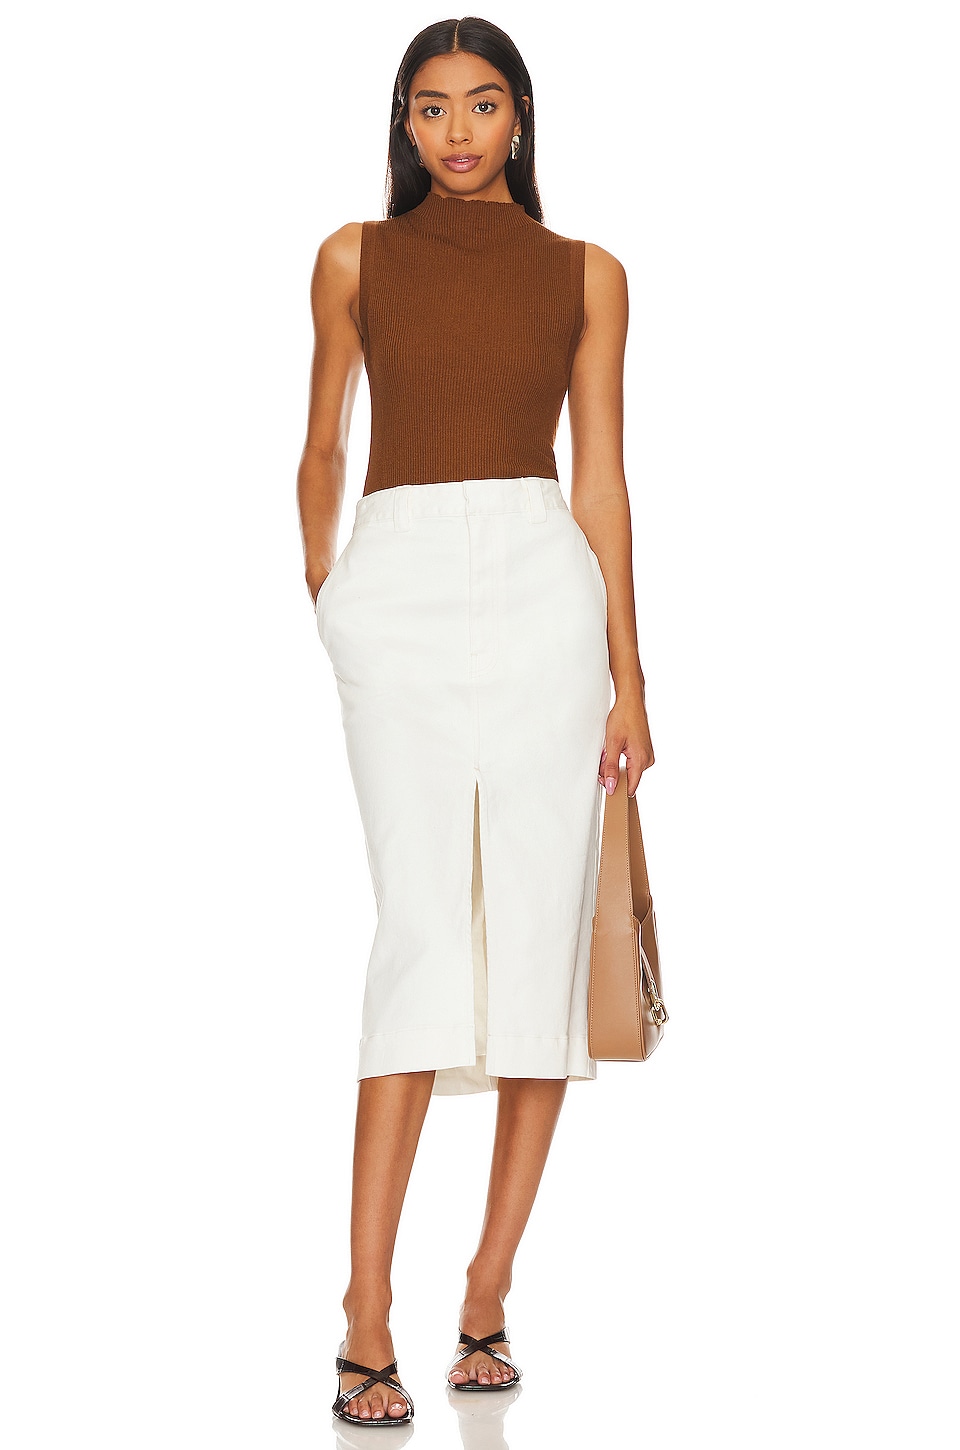 Enza Costa Soft Touch Slit Skirt in Undyed | REVOLVE